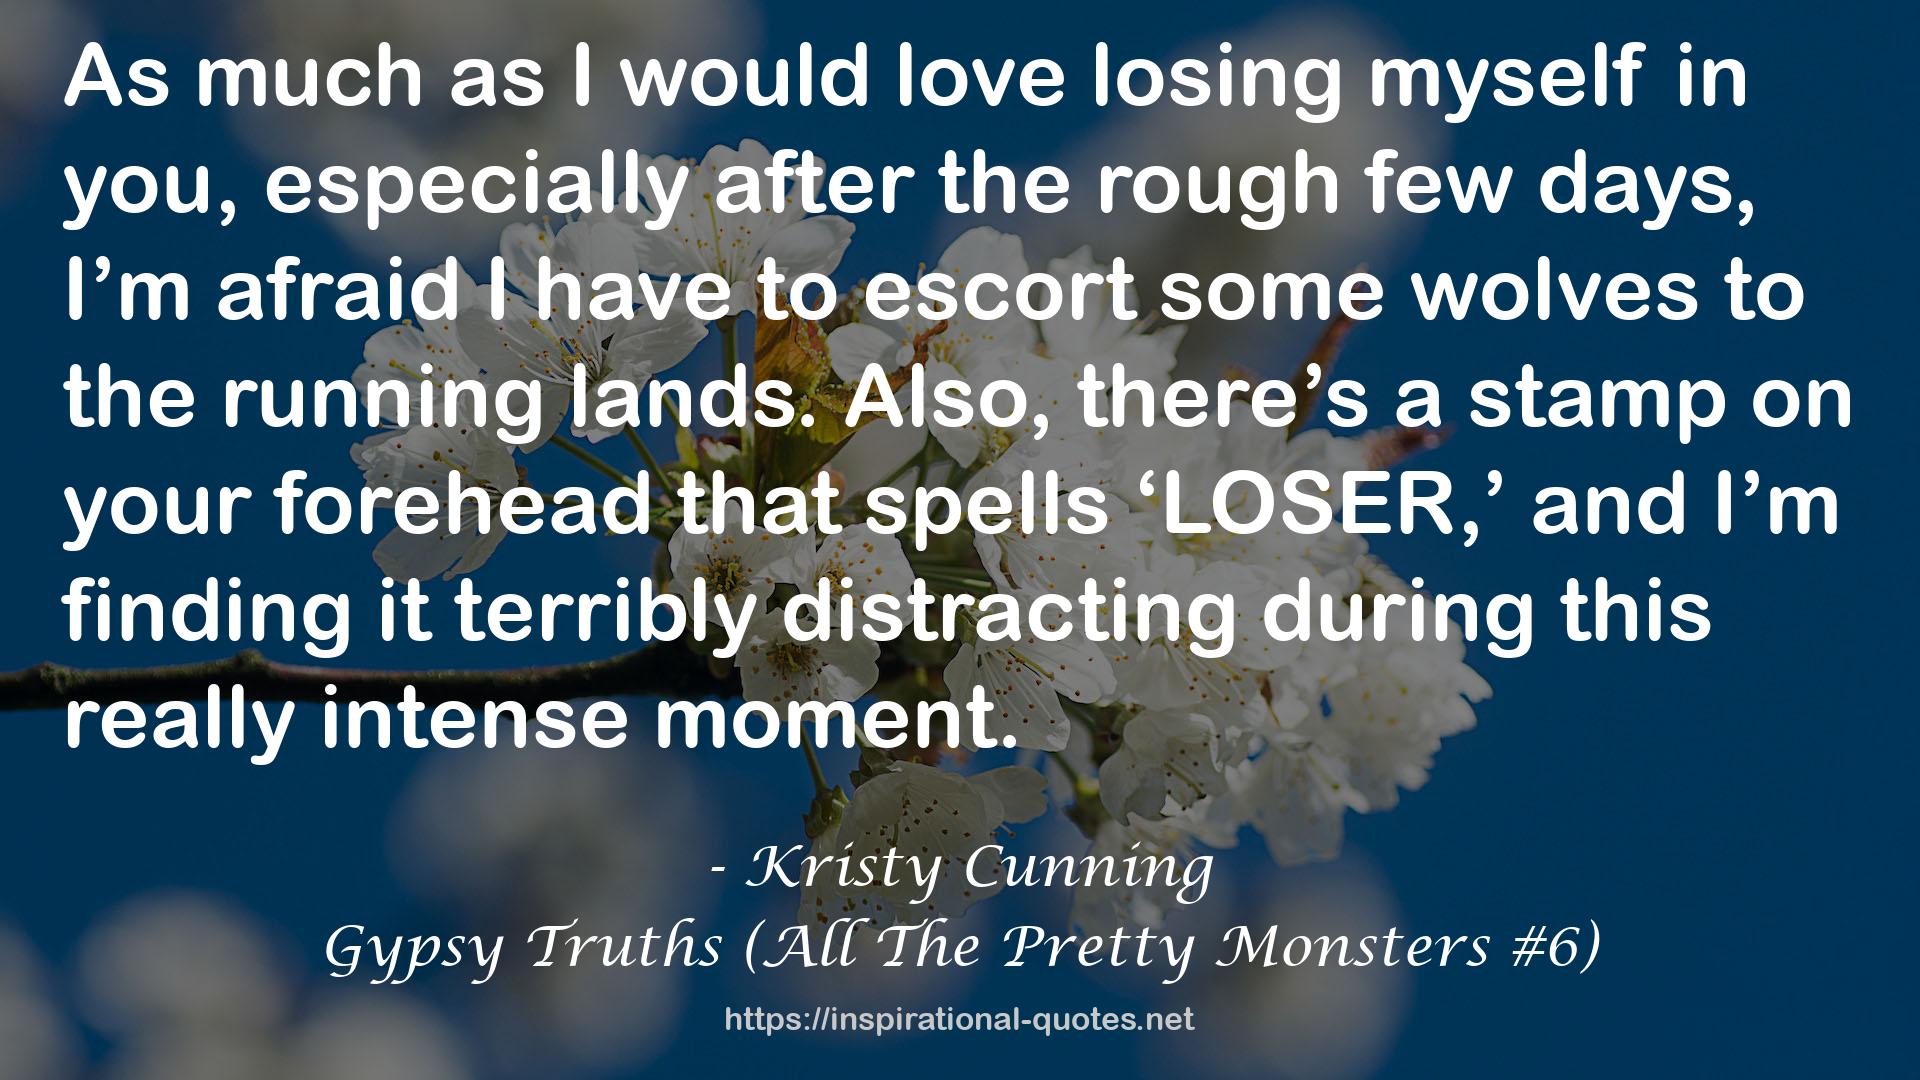 Gypsy Truths (All The Pretty Monsters #6) QUOTES